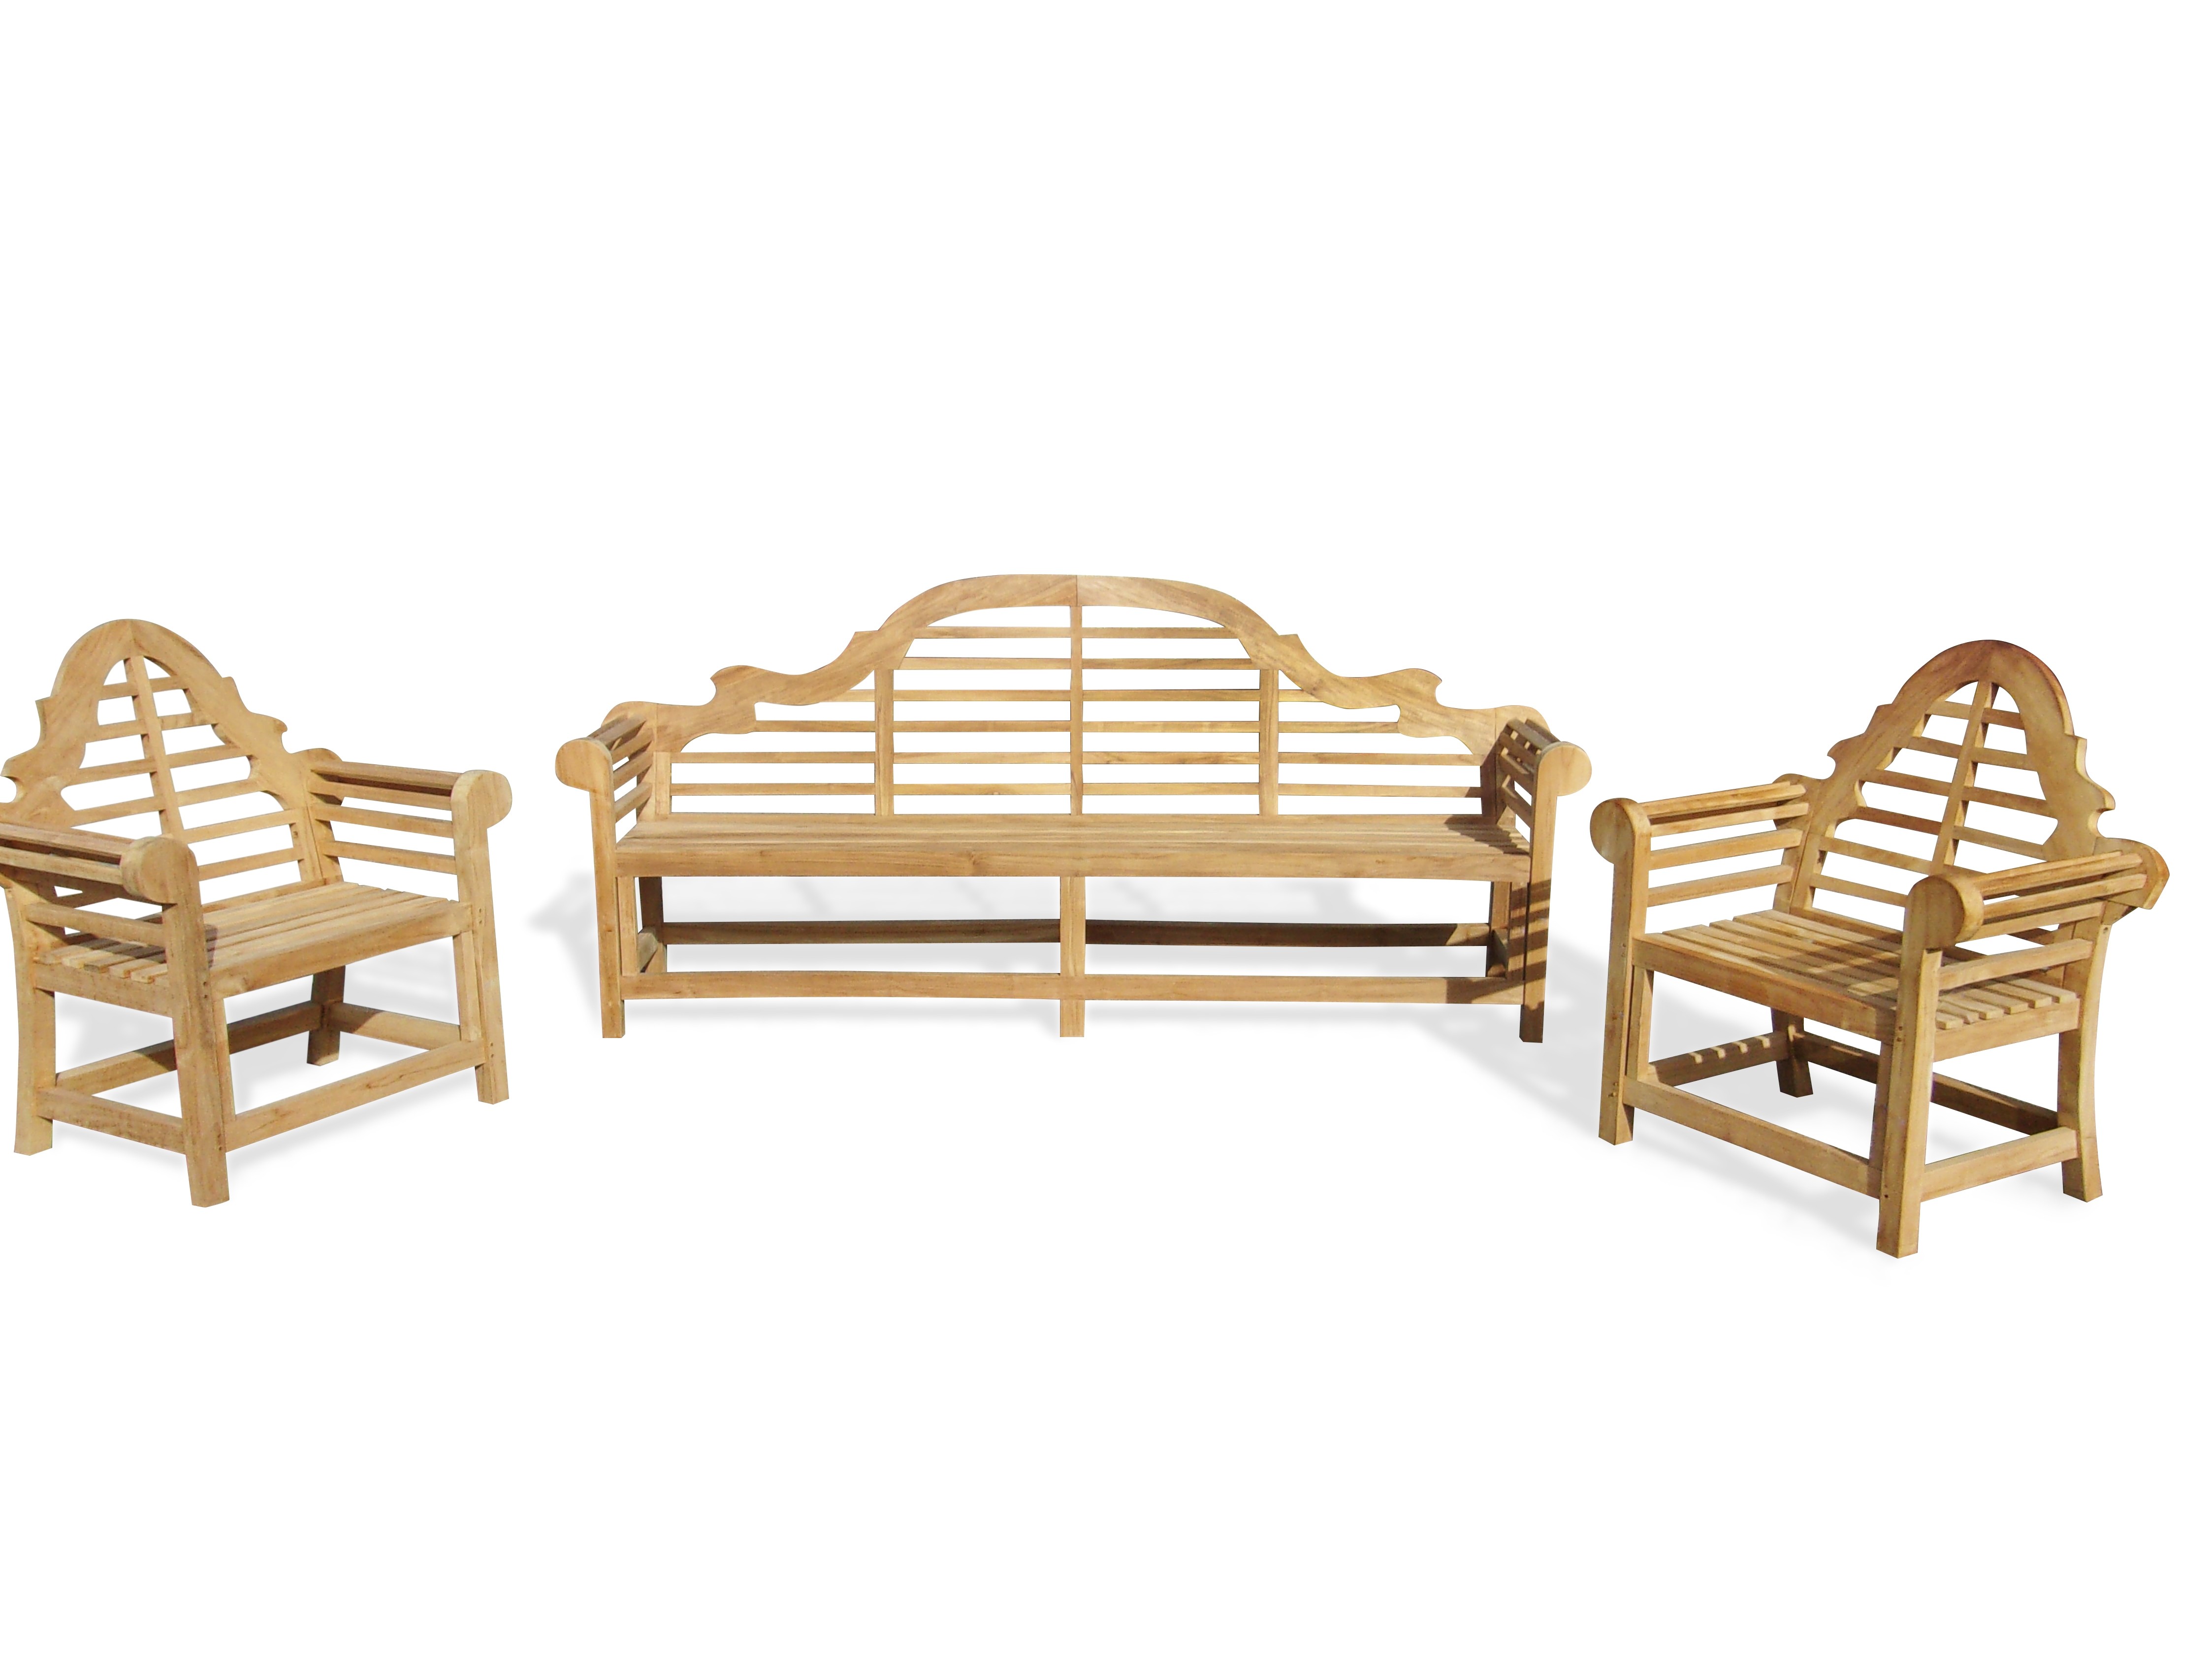 The Iconic 8 Foot (96 Inches) Grade A Teak Lutyens Bench (The Original Scale) w 2 Lutyens Chairs